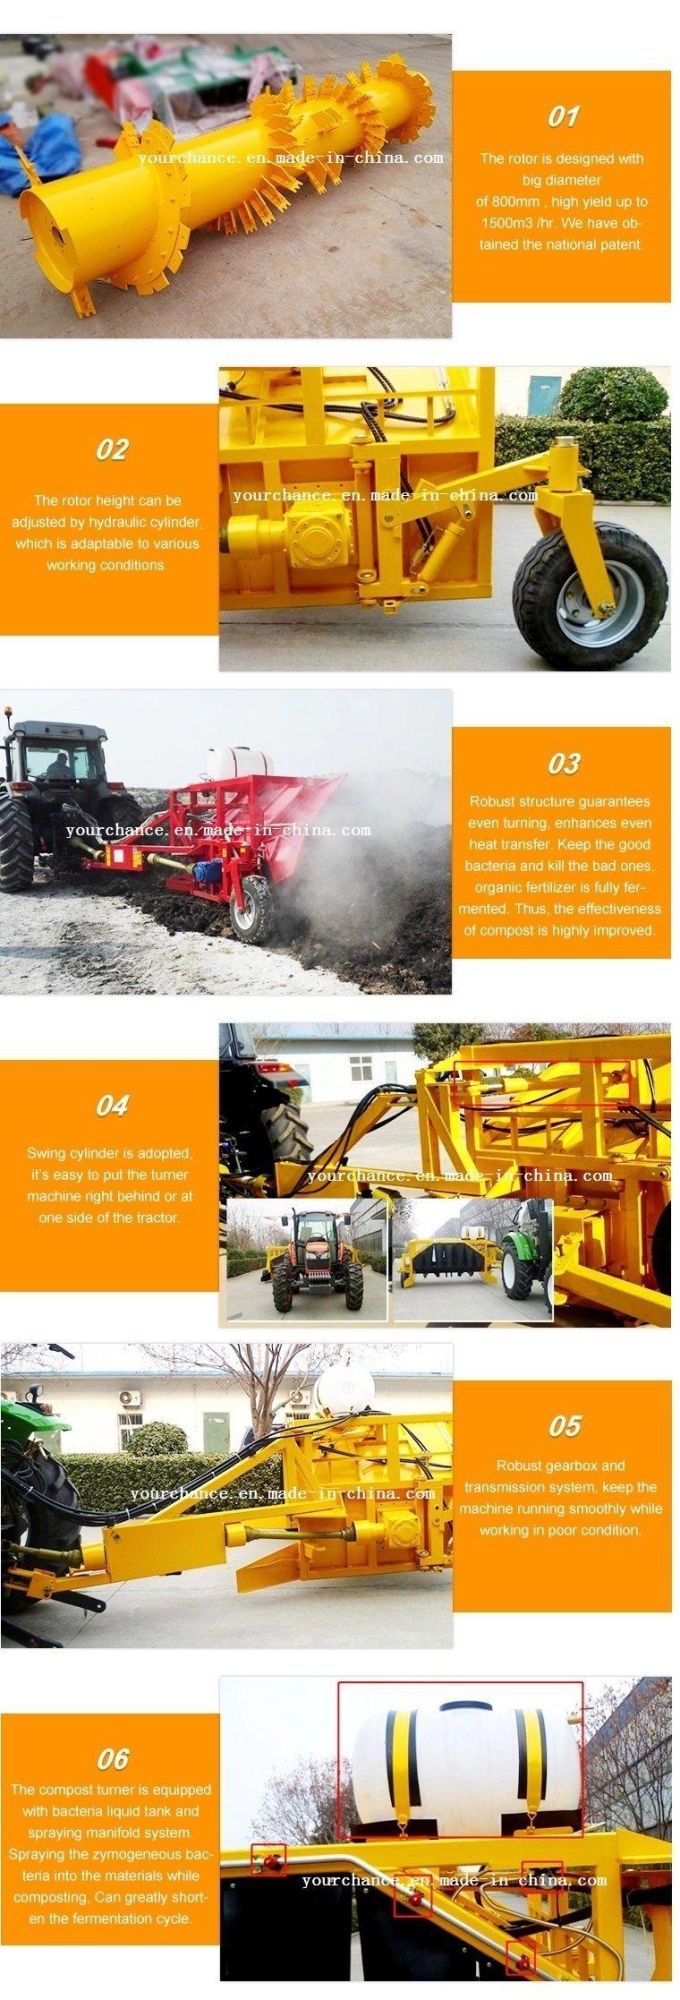 Indonesia Hot Selling Organic Fertilizer Making Machine Zfq200 2m Width Animal Manure Compost Windrow Mixer Turner for 60-80HP Wheel Tractor